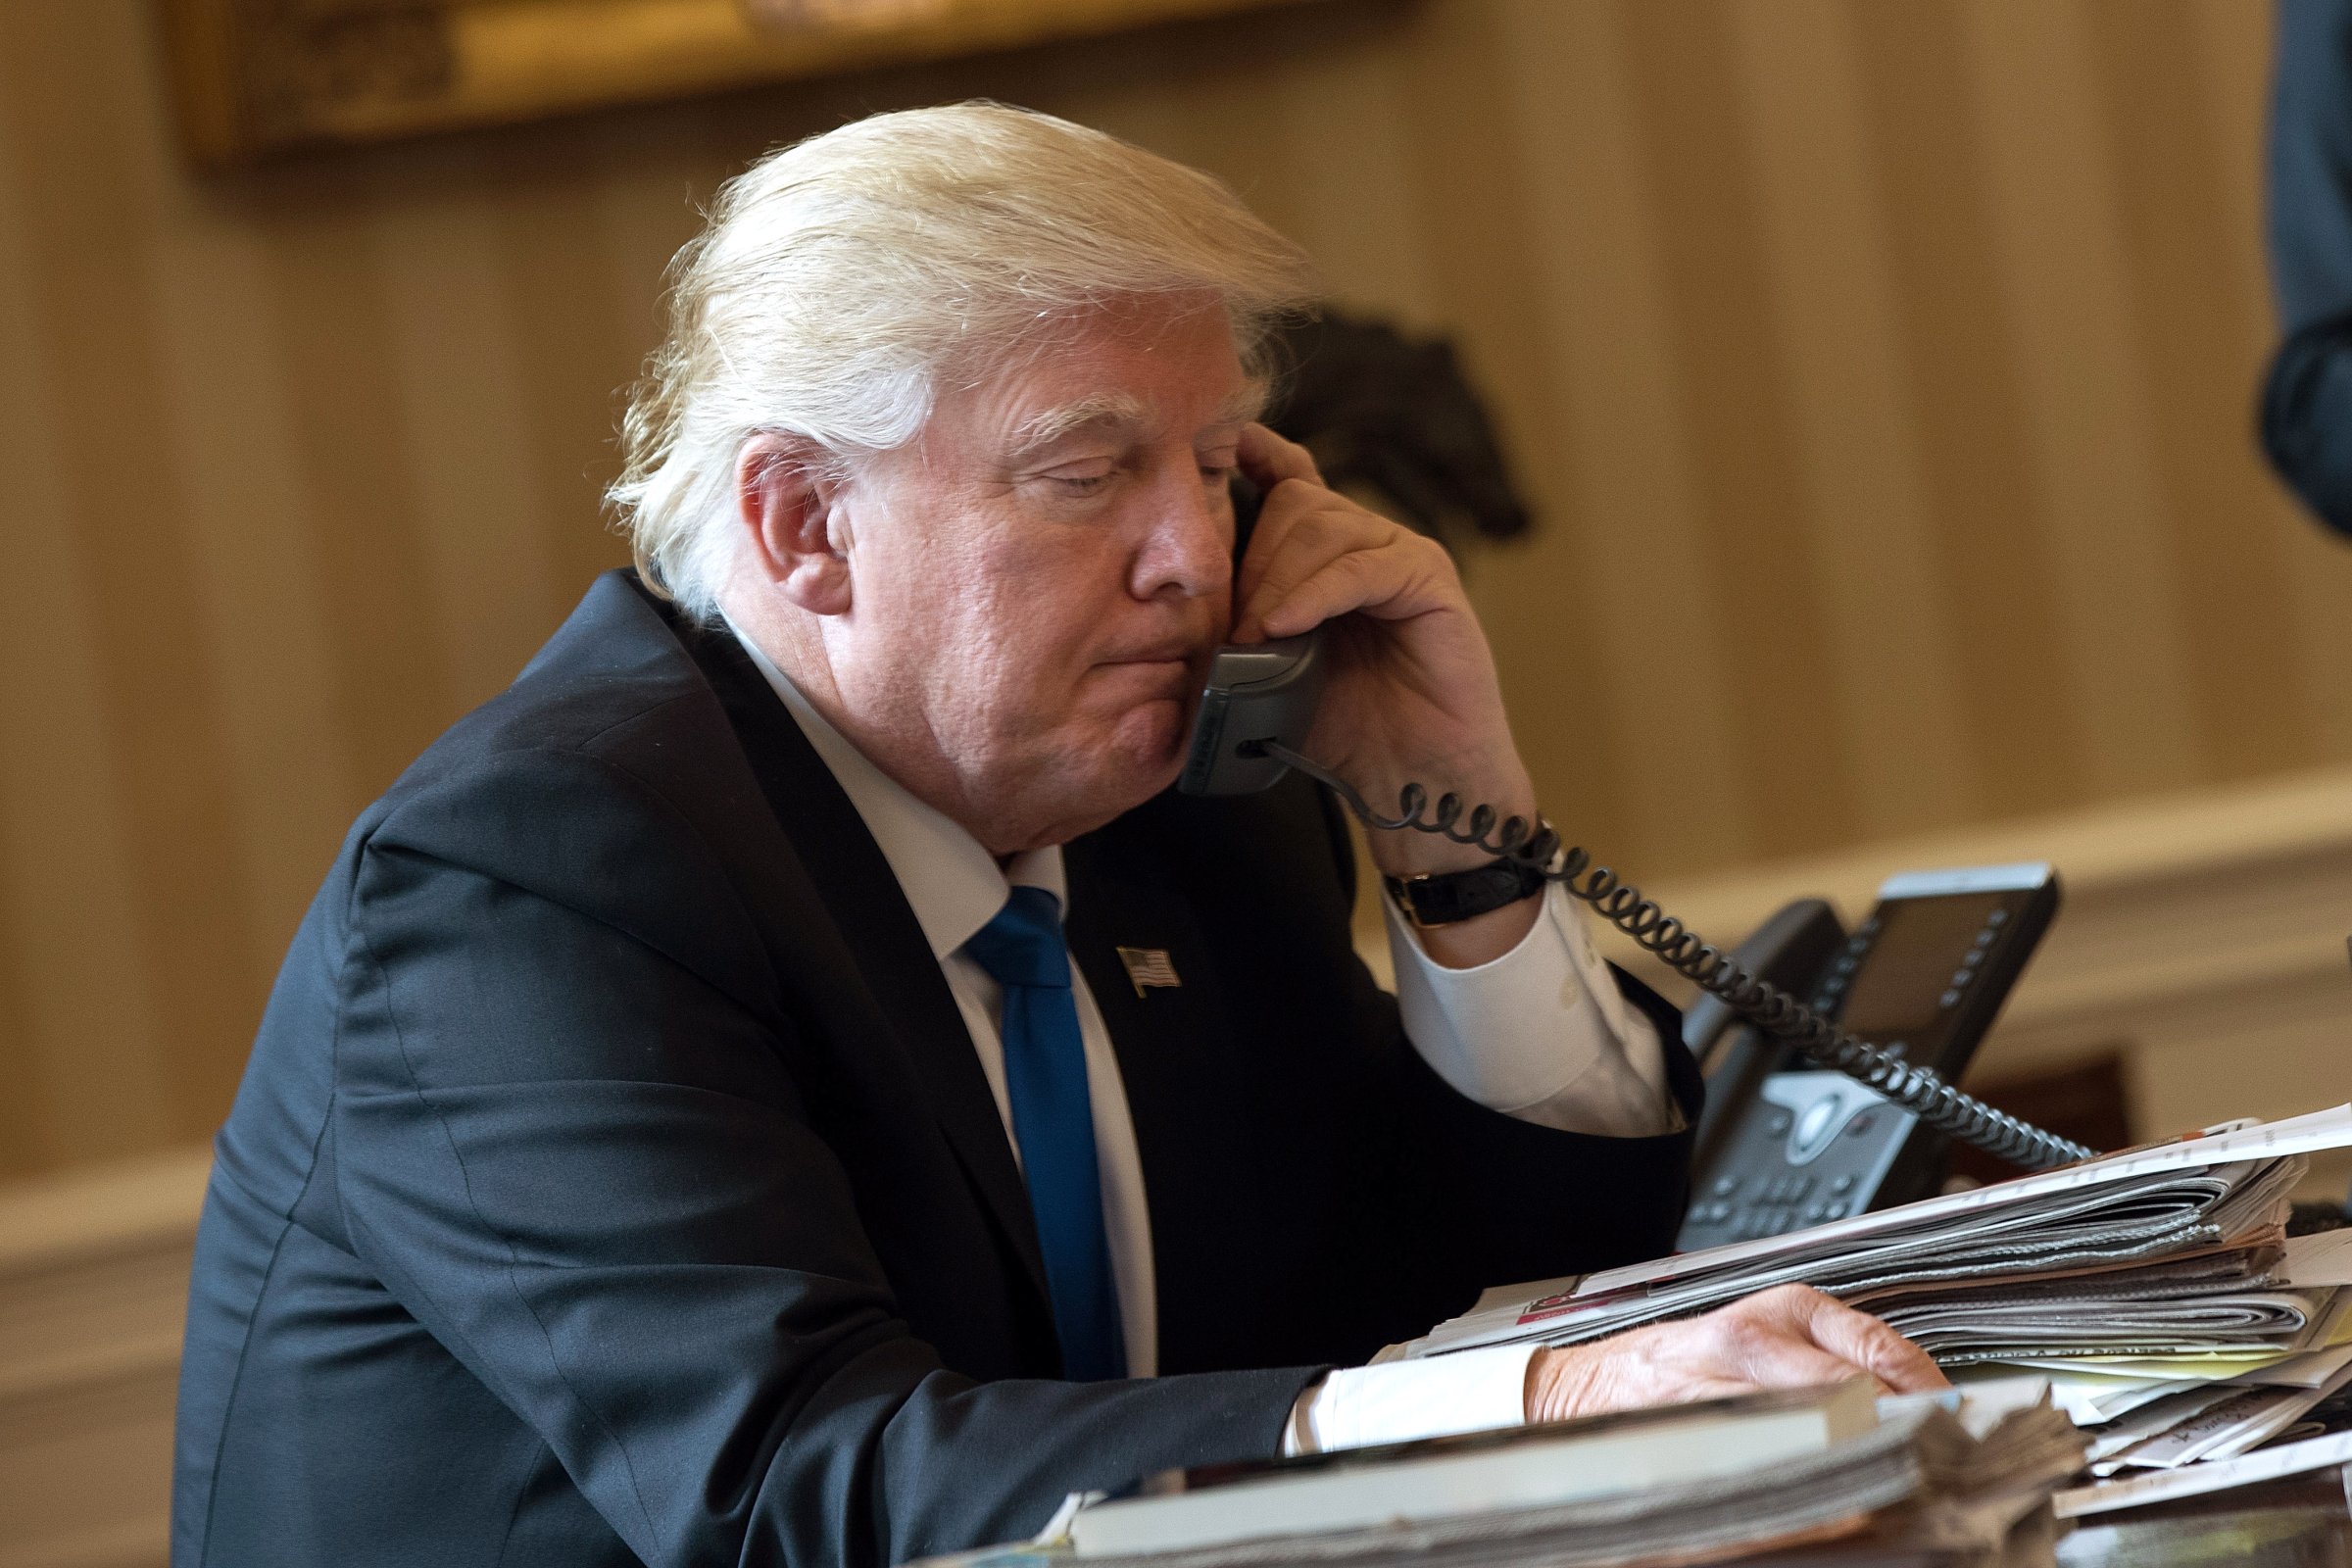 President Donald Trump speaks on the phone with Russian President Vladimir Putin in the Oval Office of the White House, January 28, 2017 in Washington, DC.